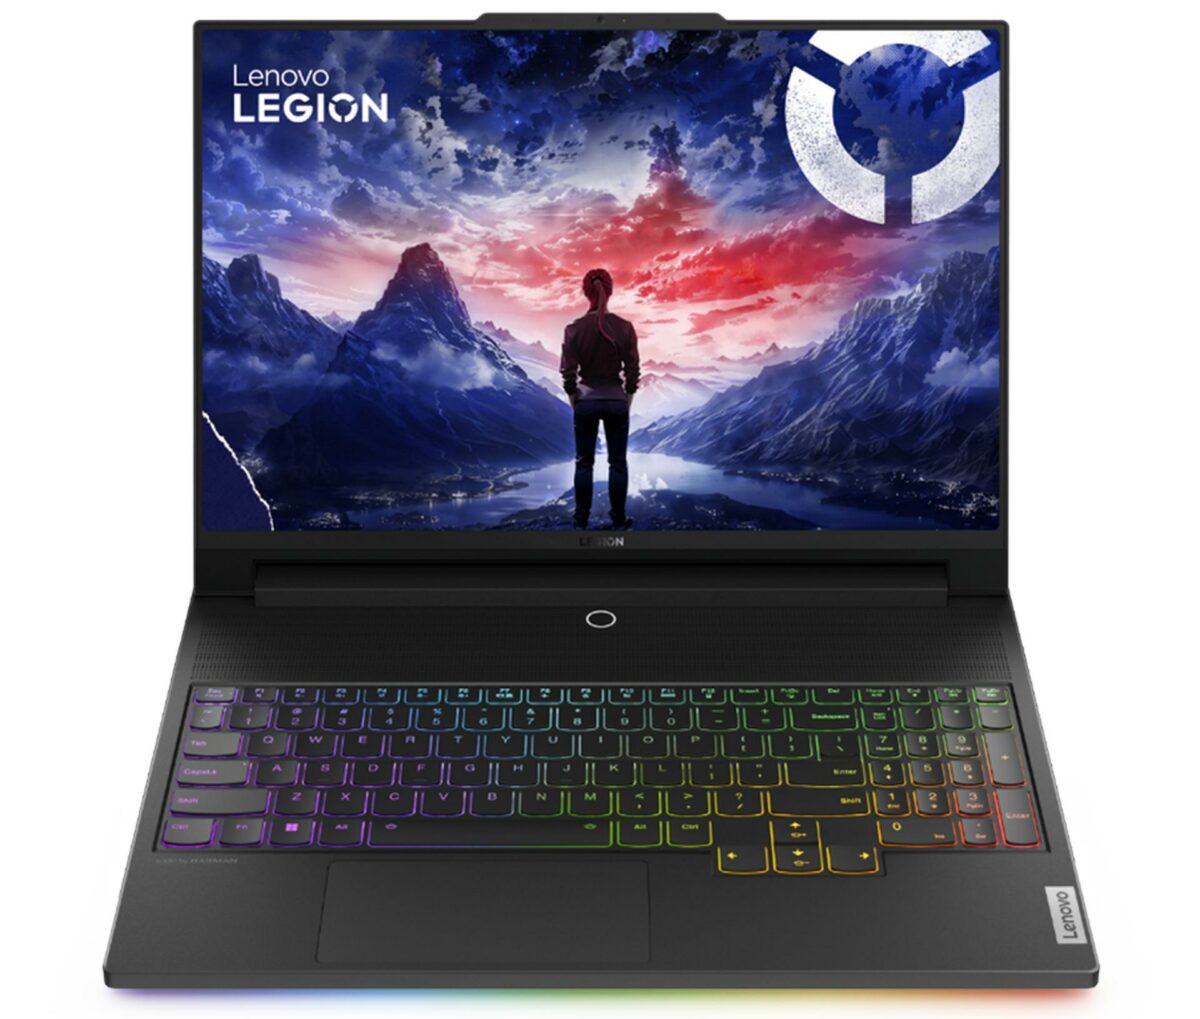 Lenovo Legion gaming laptop with RGB-lit keyboard and 16in display.